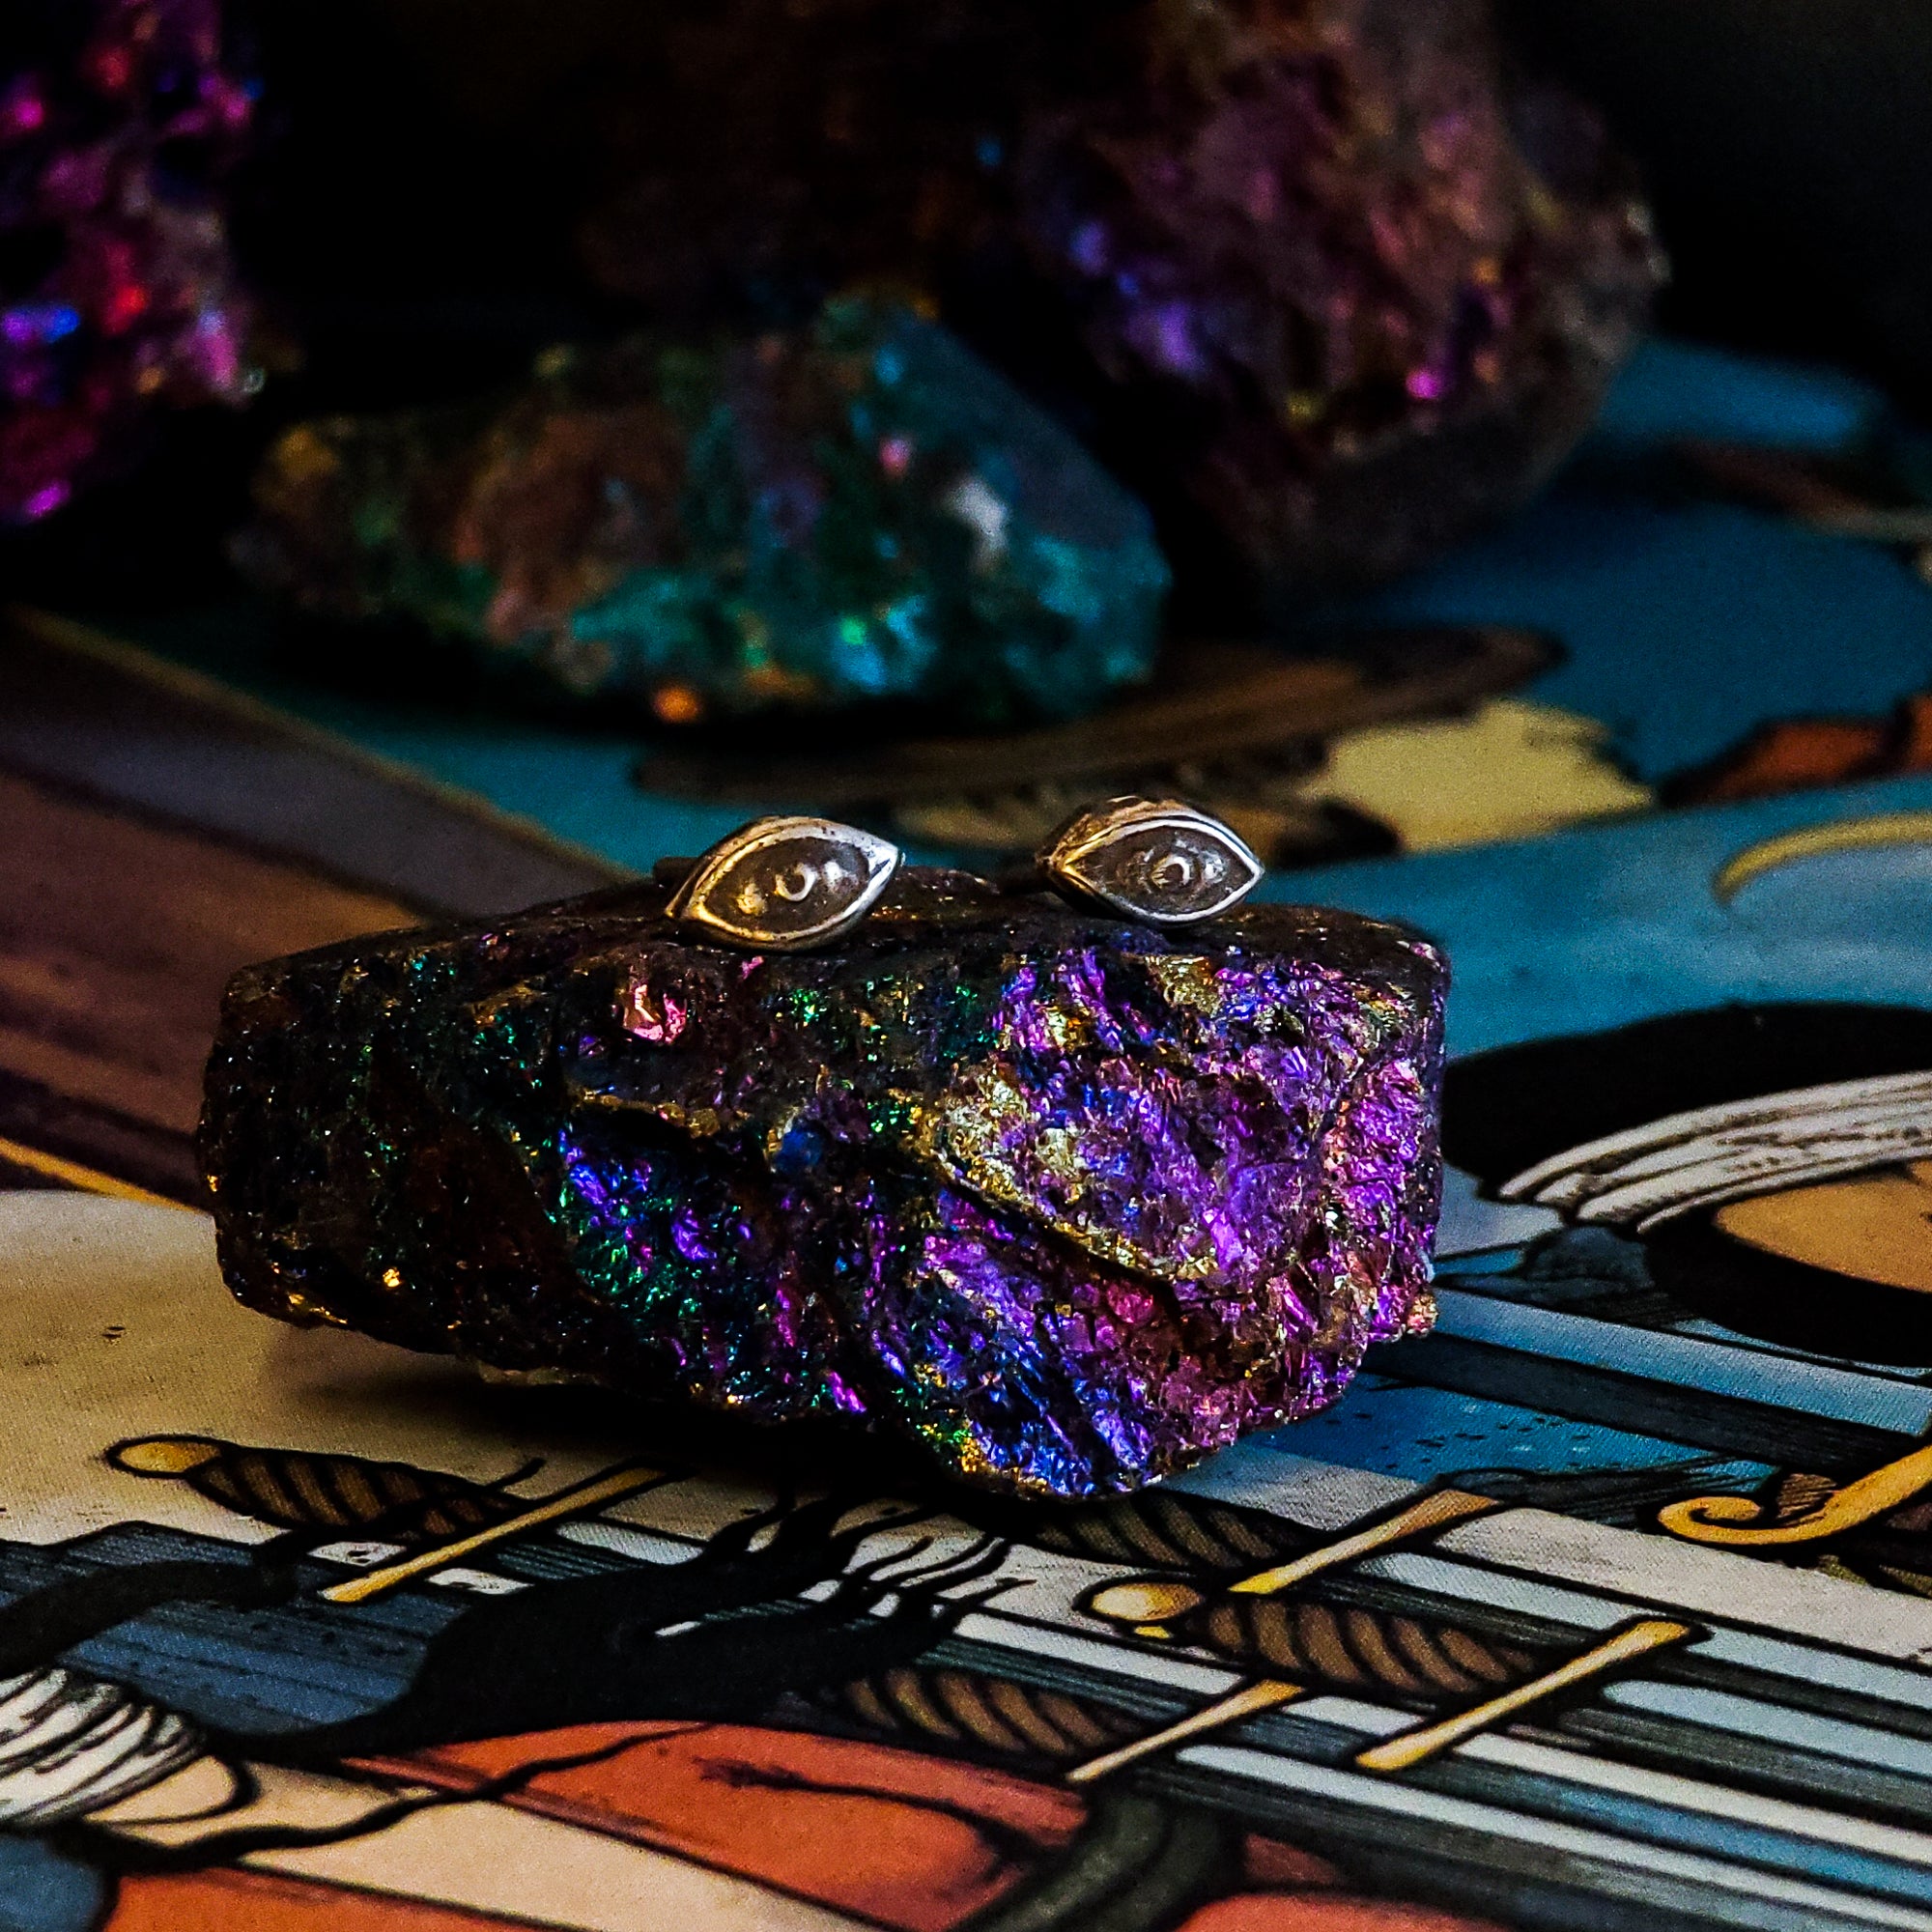 A pair of sterling silver stud earrings in the shape of human eyes sit stop a sparkly multicolored rock. Beneath the rock, there are tarot cards showing images of people with cloths over their eyes. In the background there are more multicolored rocks.